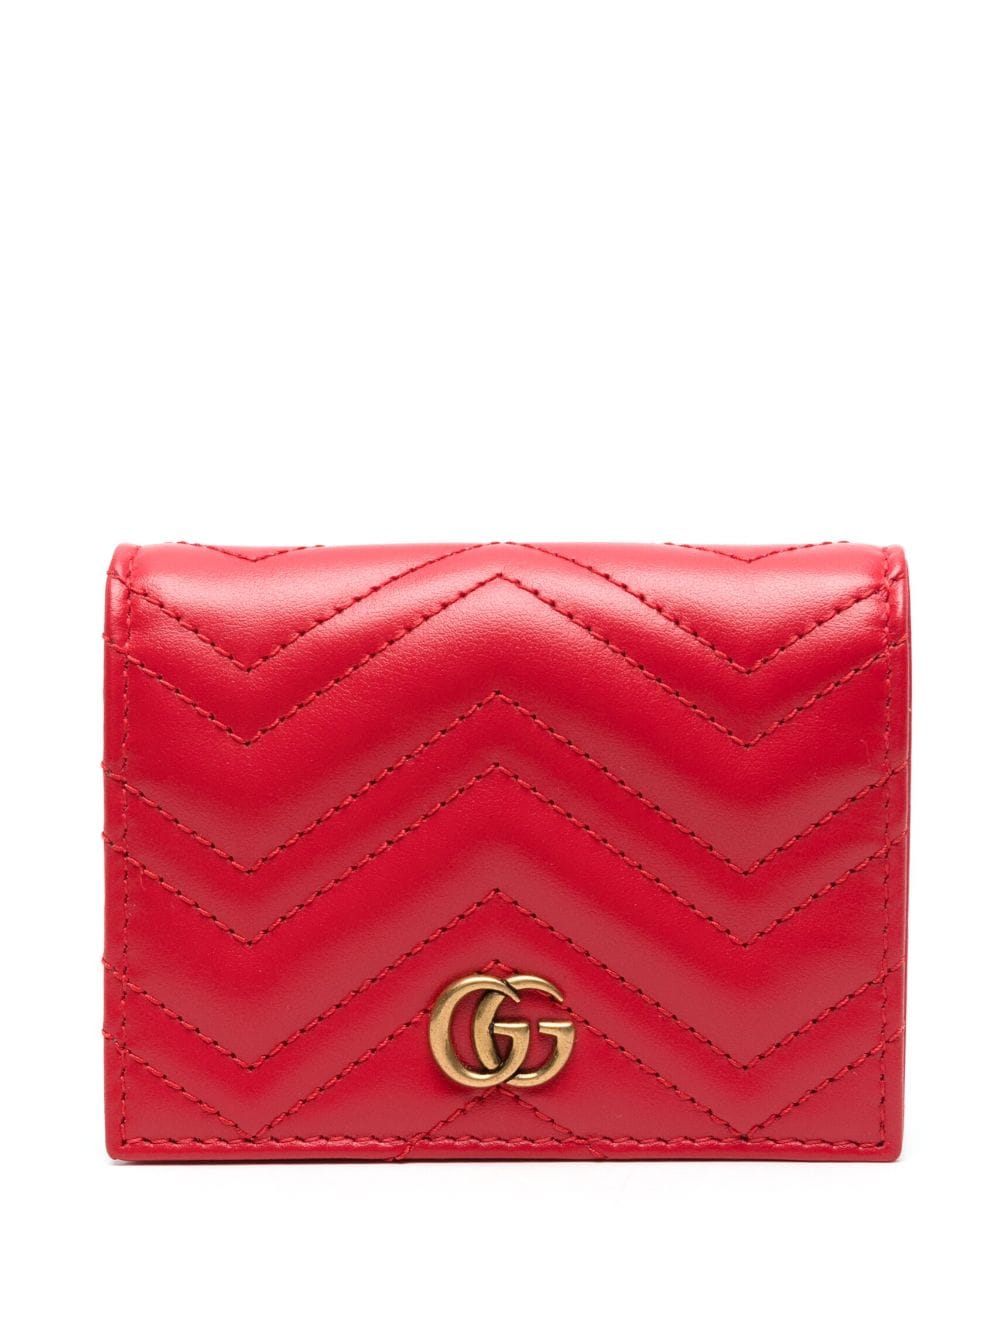 Gucci GG Marmont leather wallet - Red von Gucci